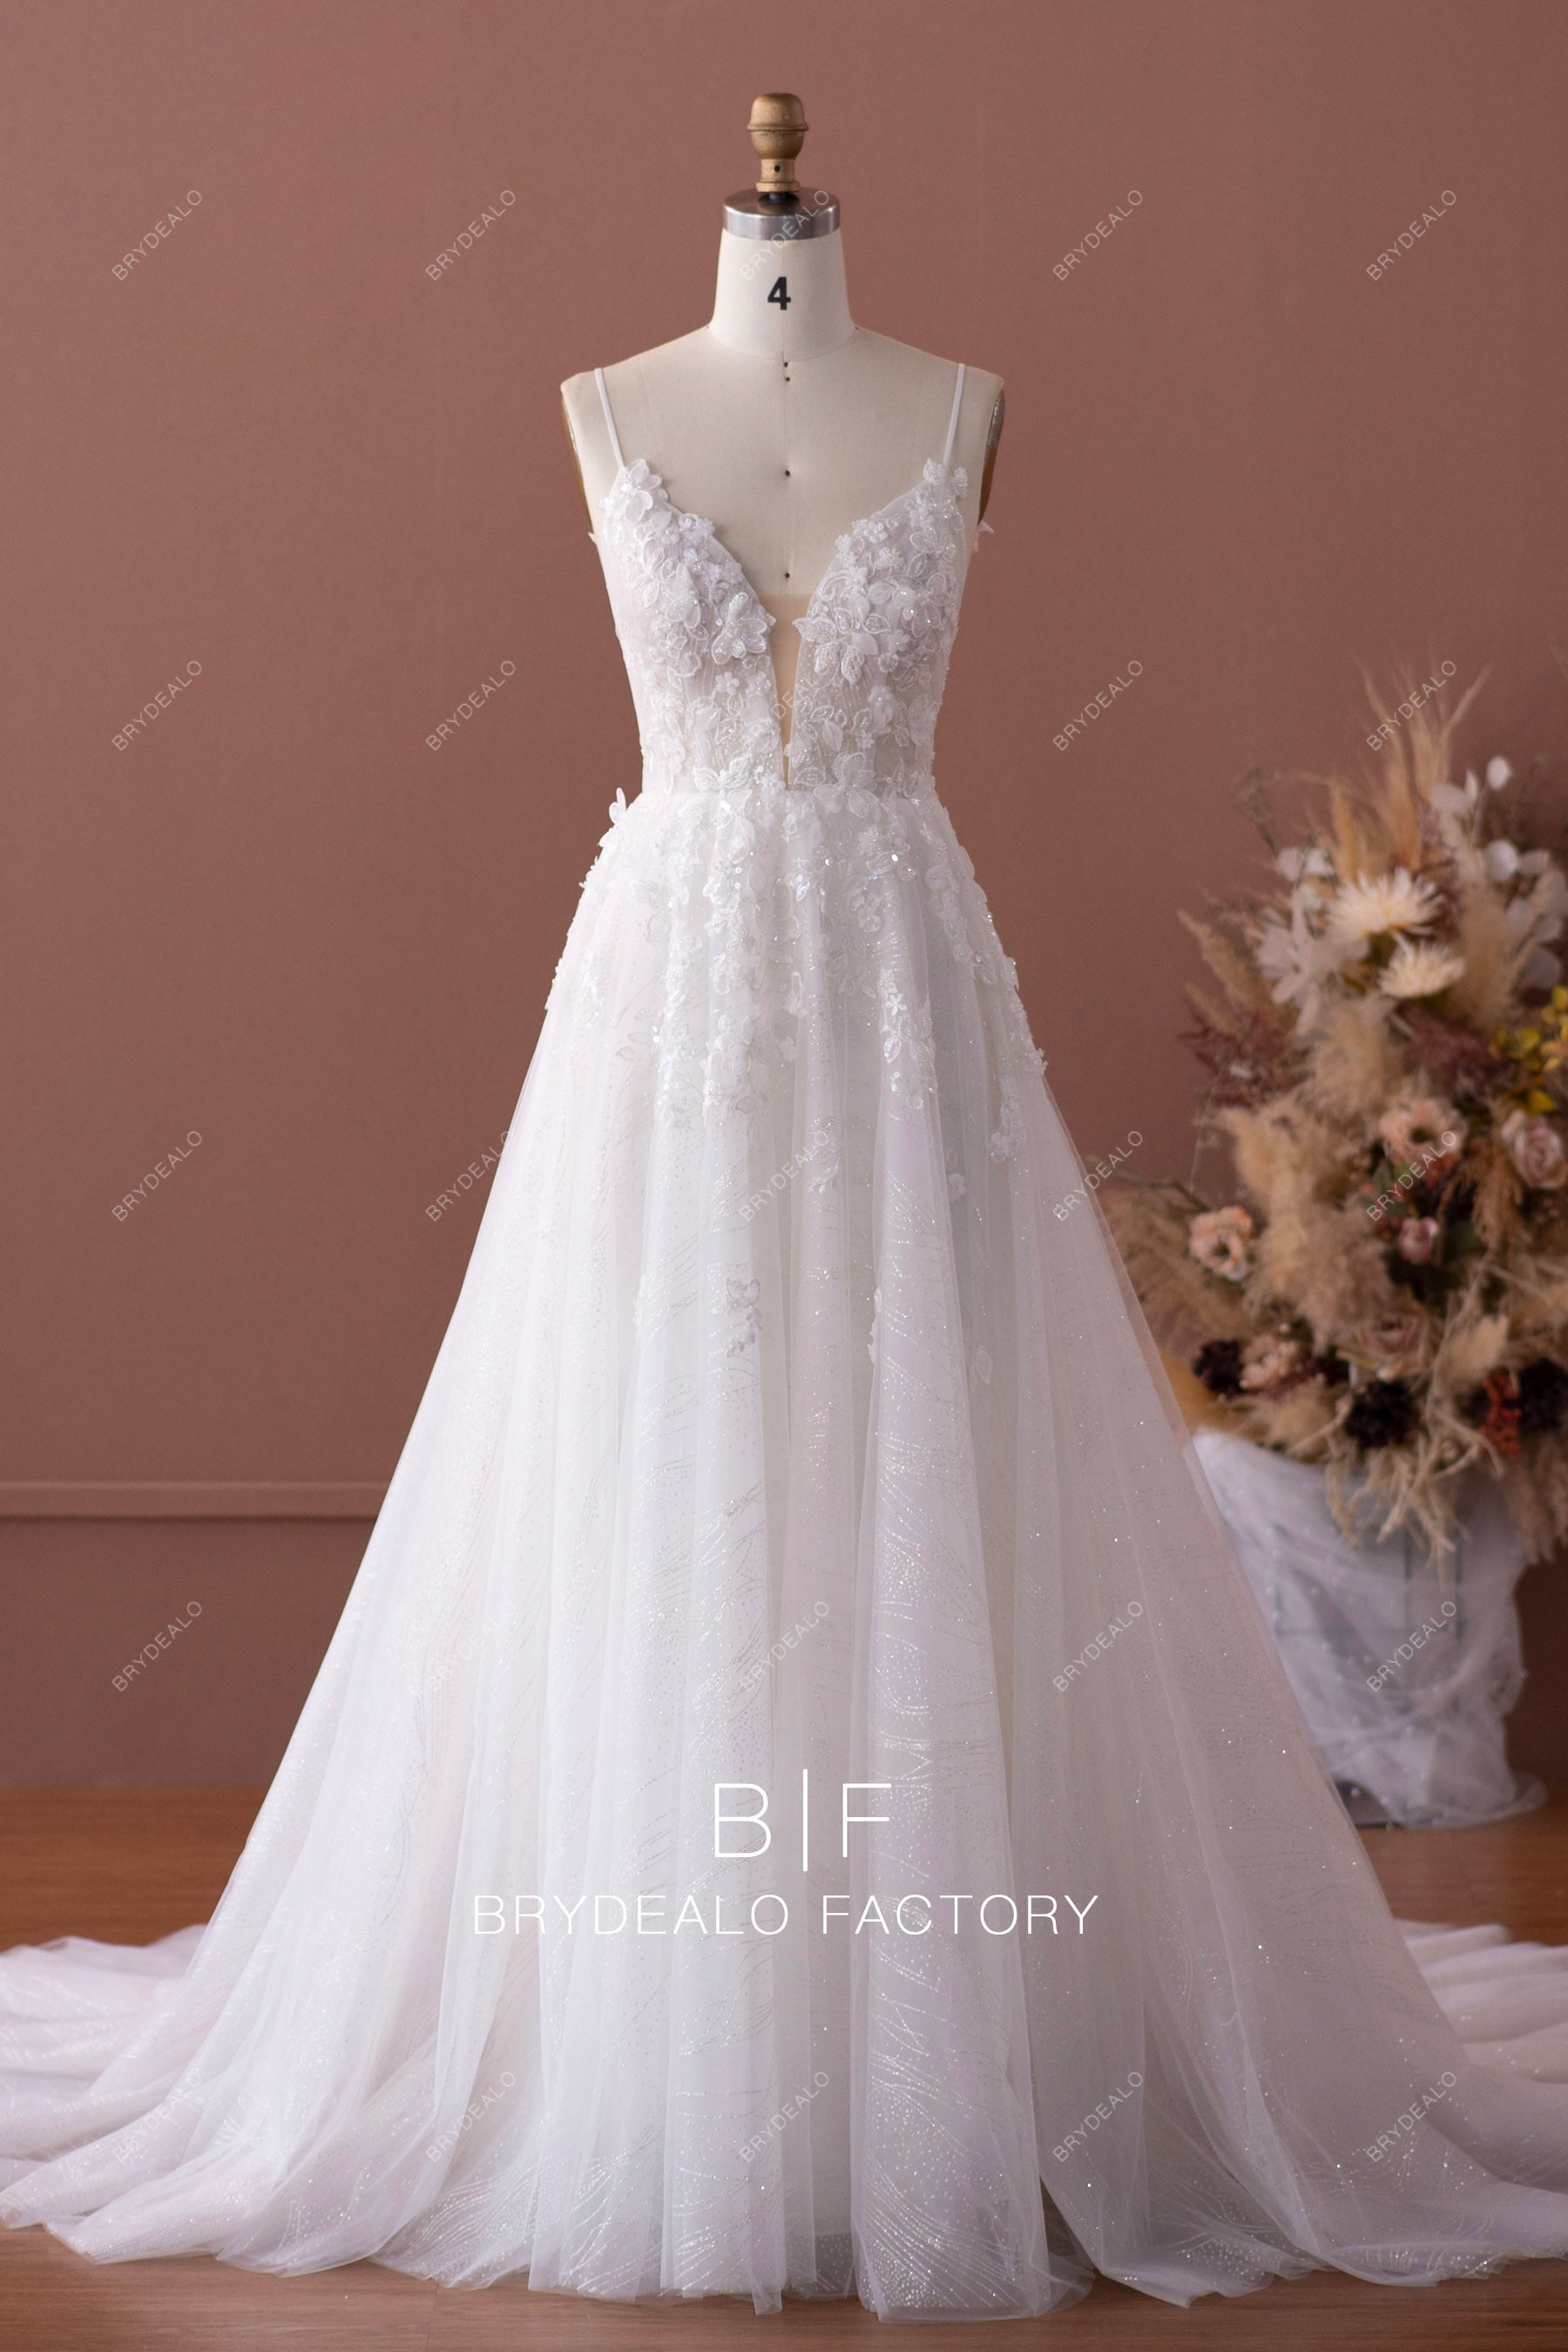 Romantic Flower Lace Plunging Neck Wedding Ball Gown